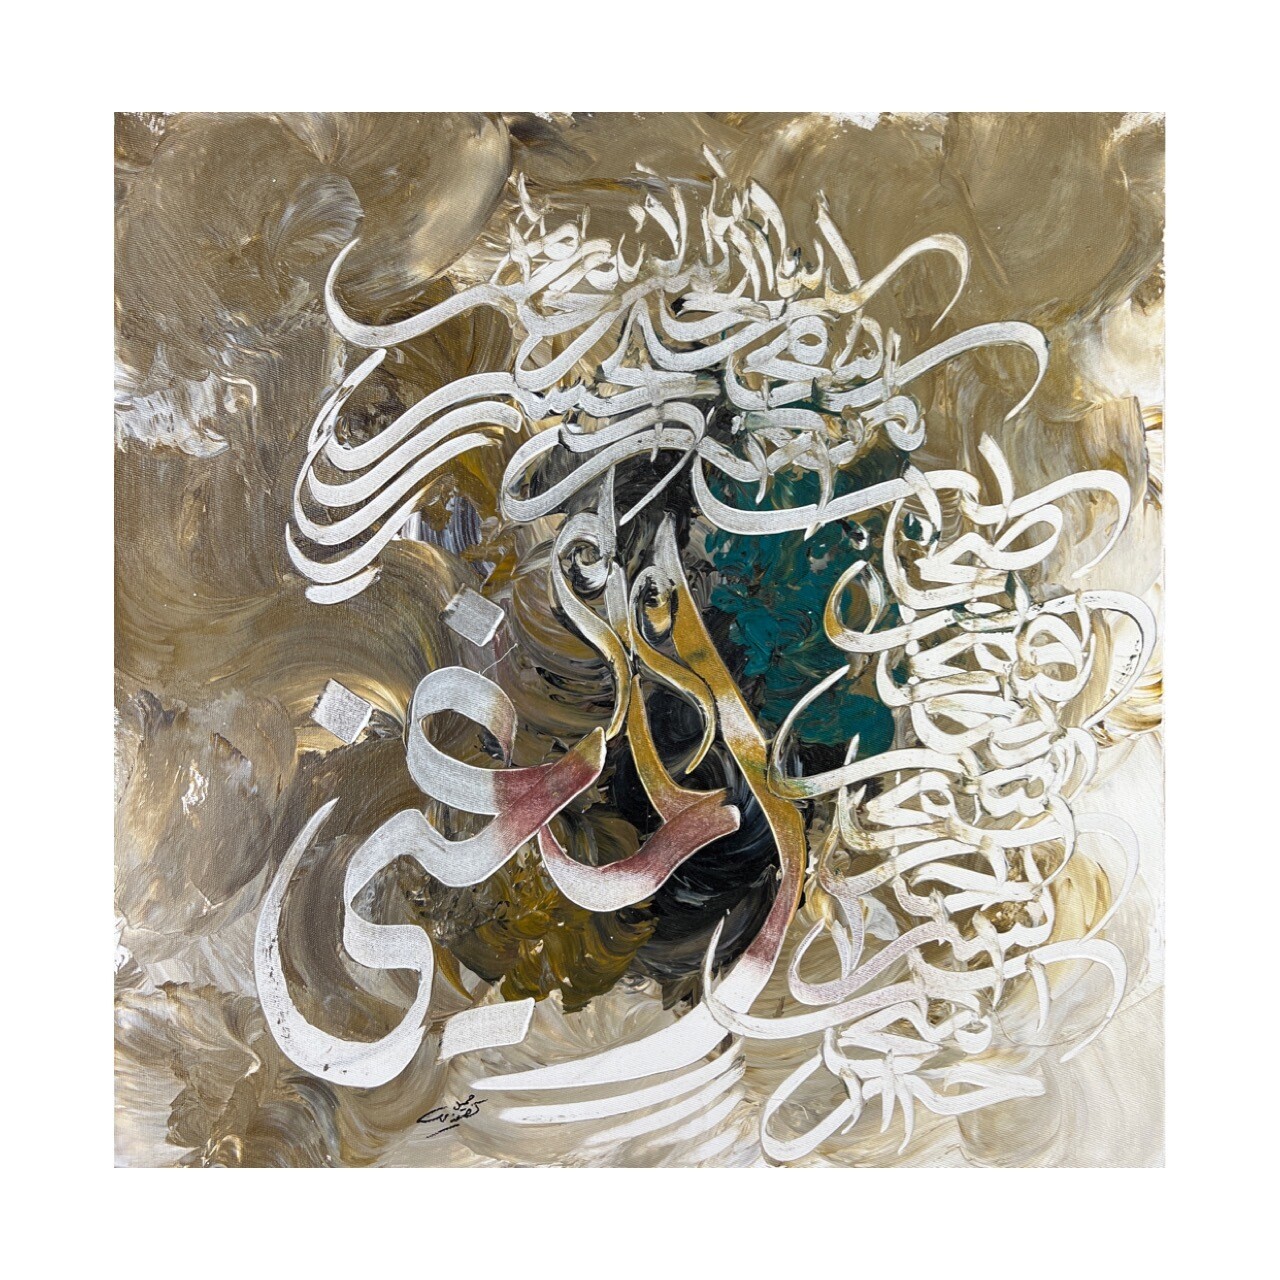 Al-Mughni, The Enricher - Name of Allah - Abstract Stylistic Design Textured Oil Painting